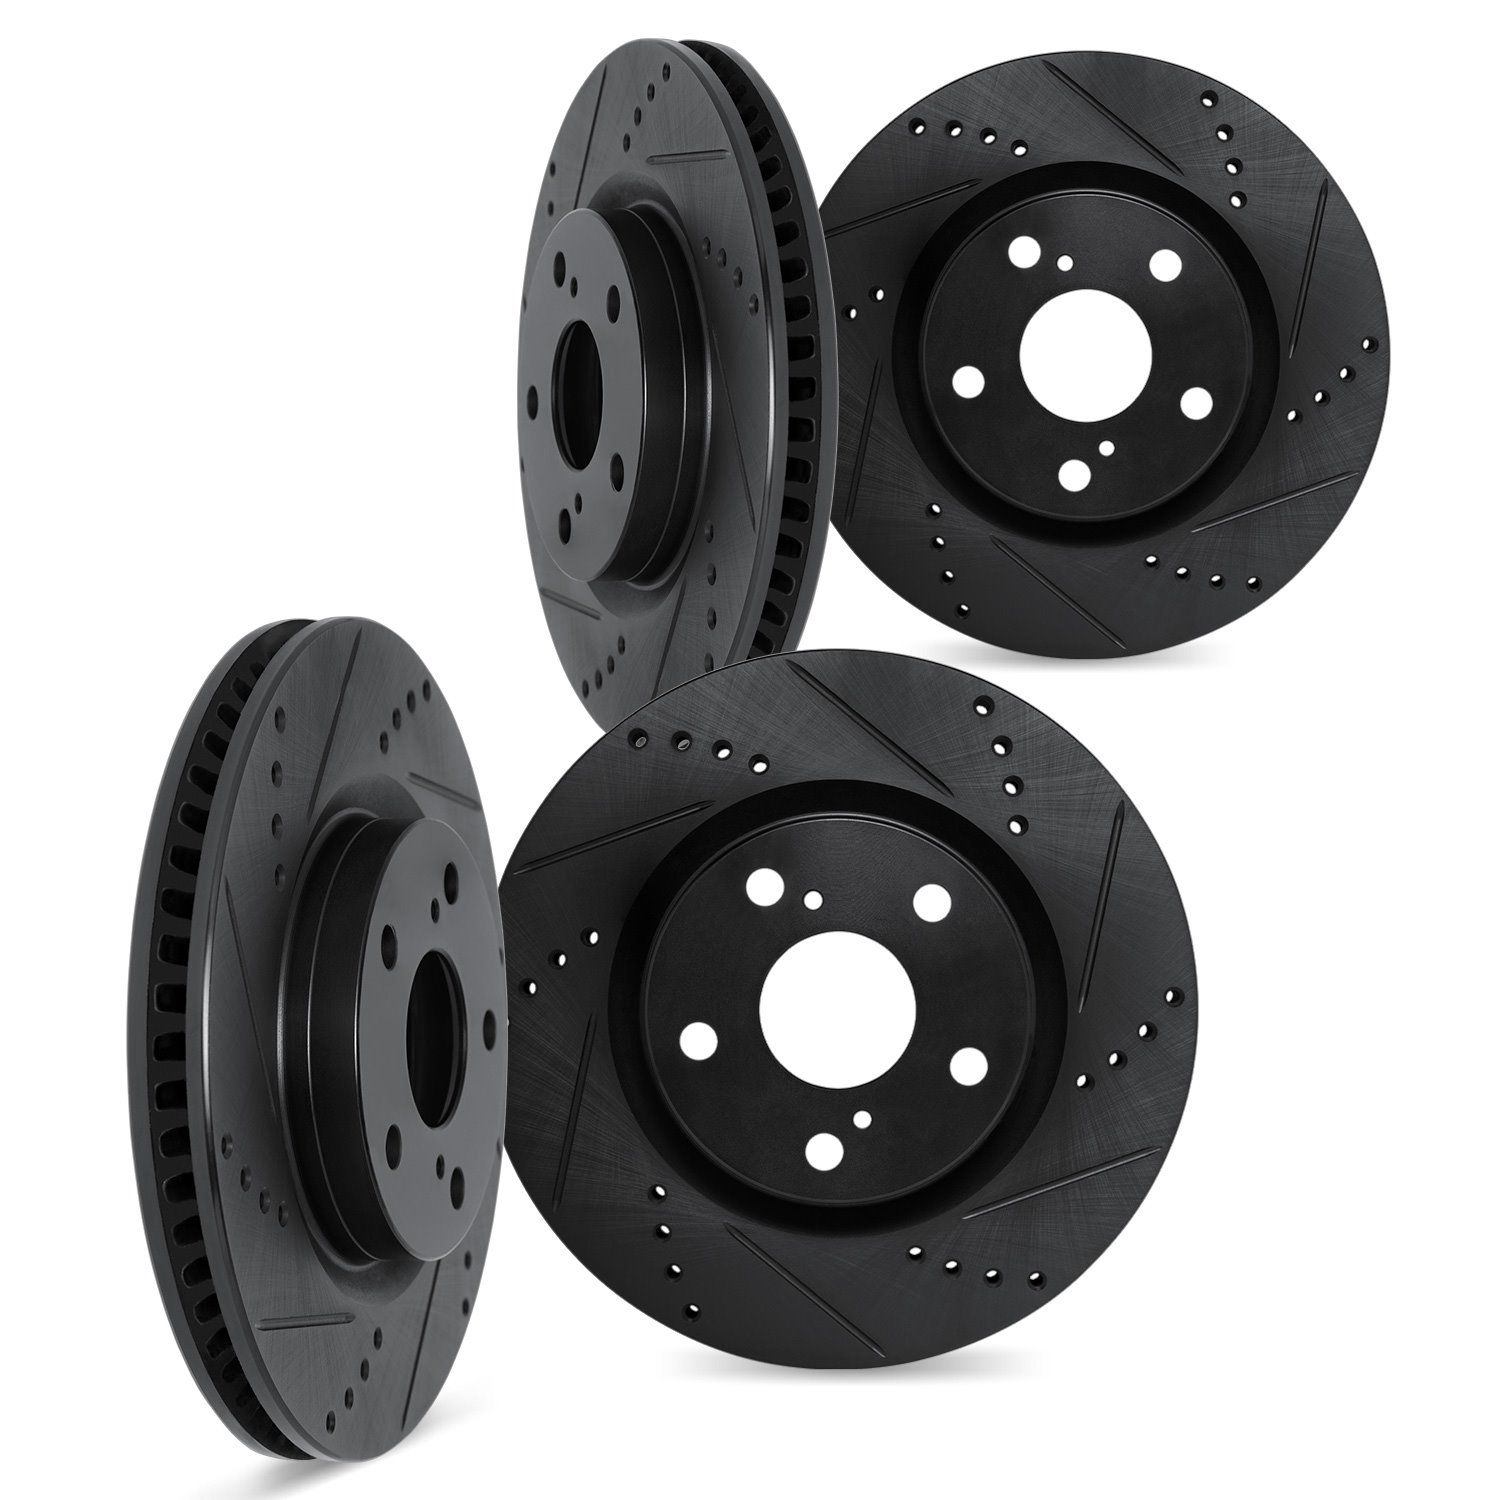 8004-42030 Drilled/Slotted Brake Rotors [Black], Fits Select Mopar, Position: Front and Rear